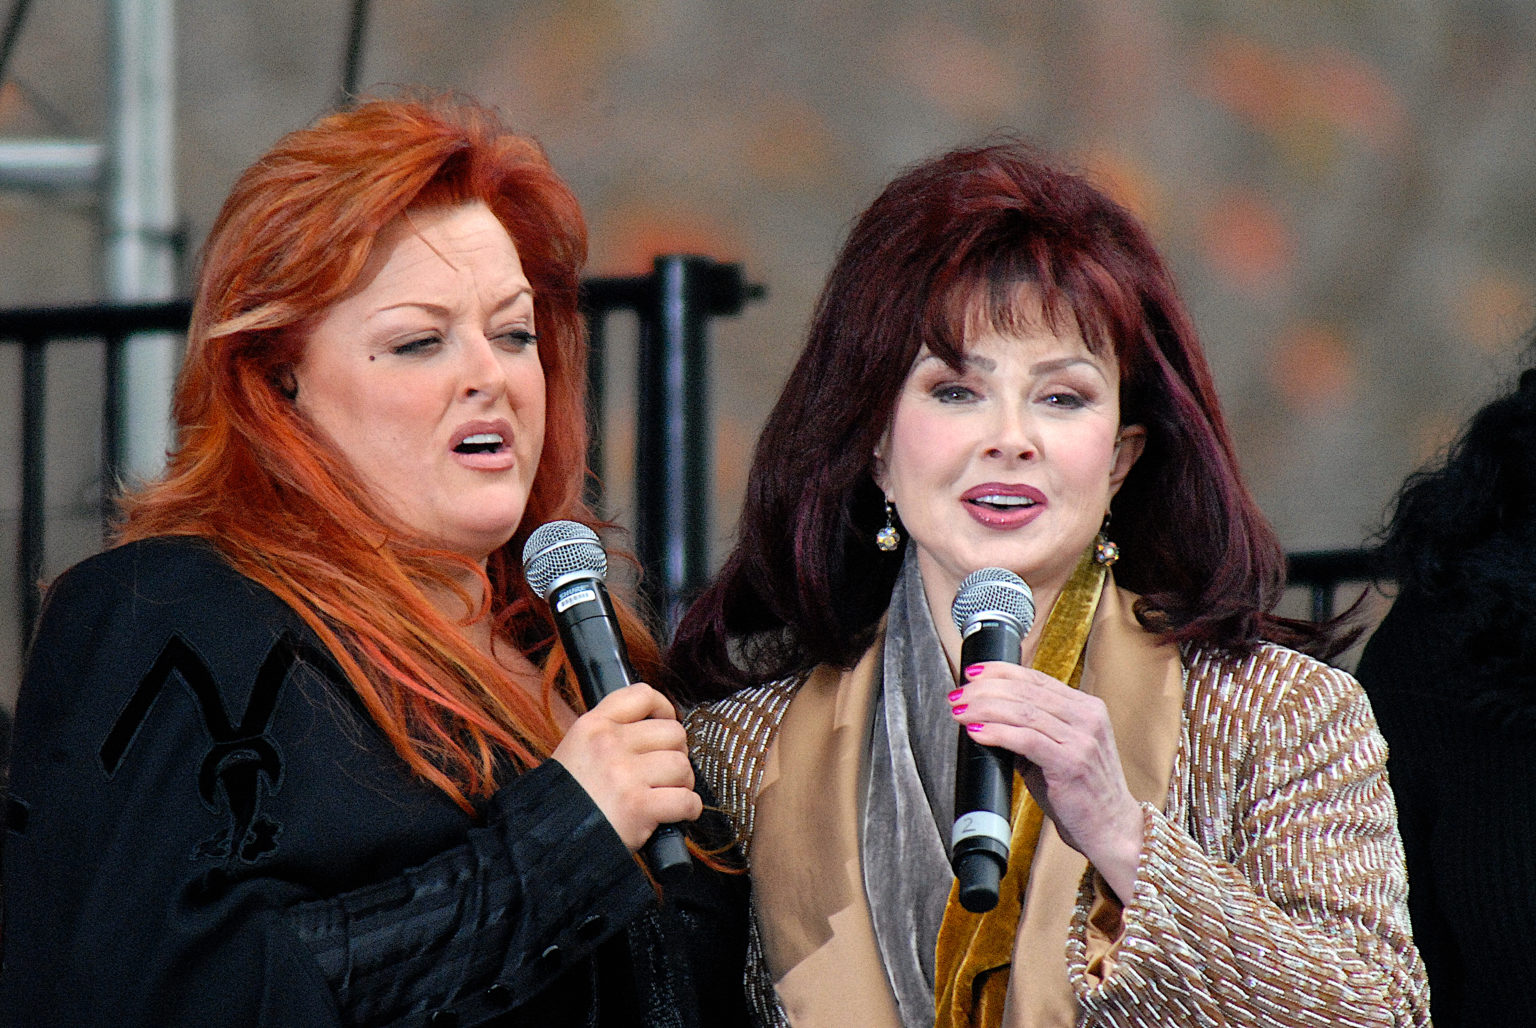 The Judd Sisters Honor Naomi Judd At Hall Of Fame Celebration 